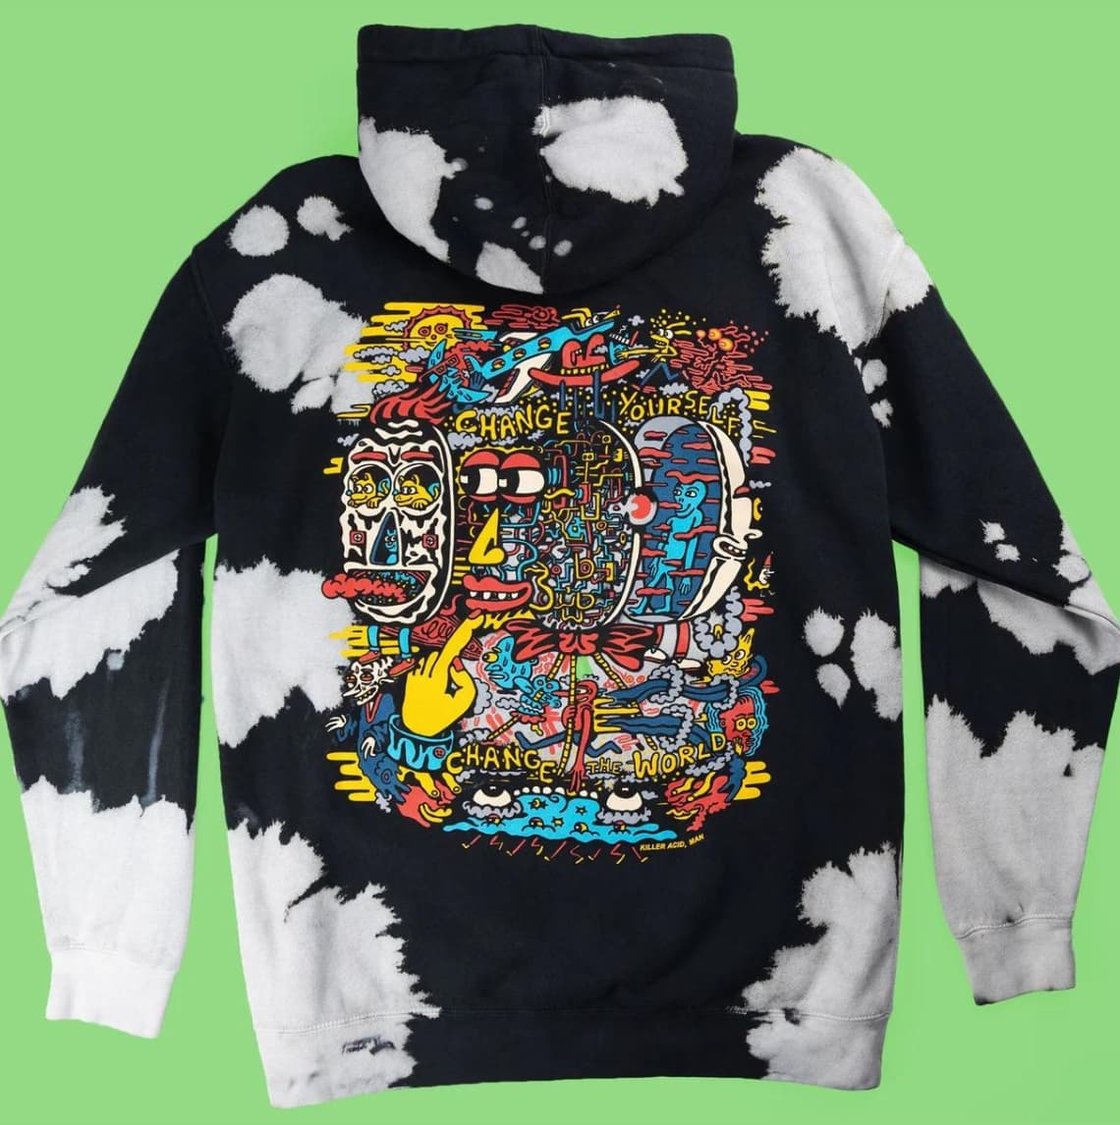 black and white tie-dyed hoodie with a colorful maximalist design